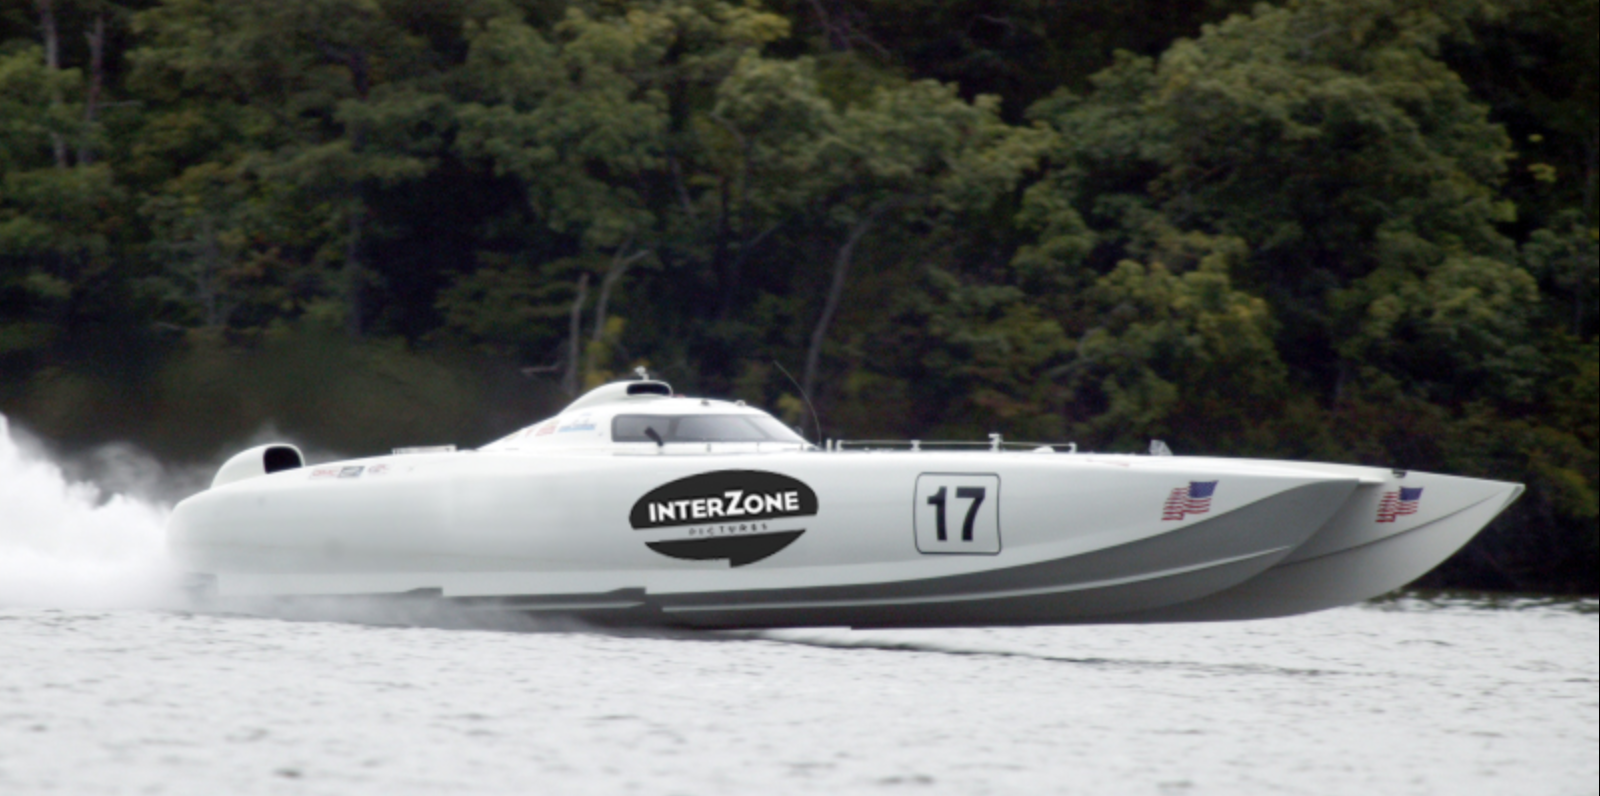 Team InterZone 42' Supercat at start of a race